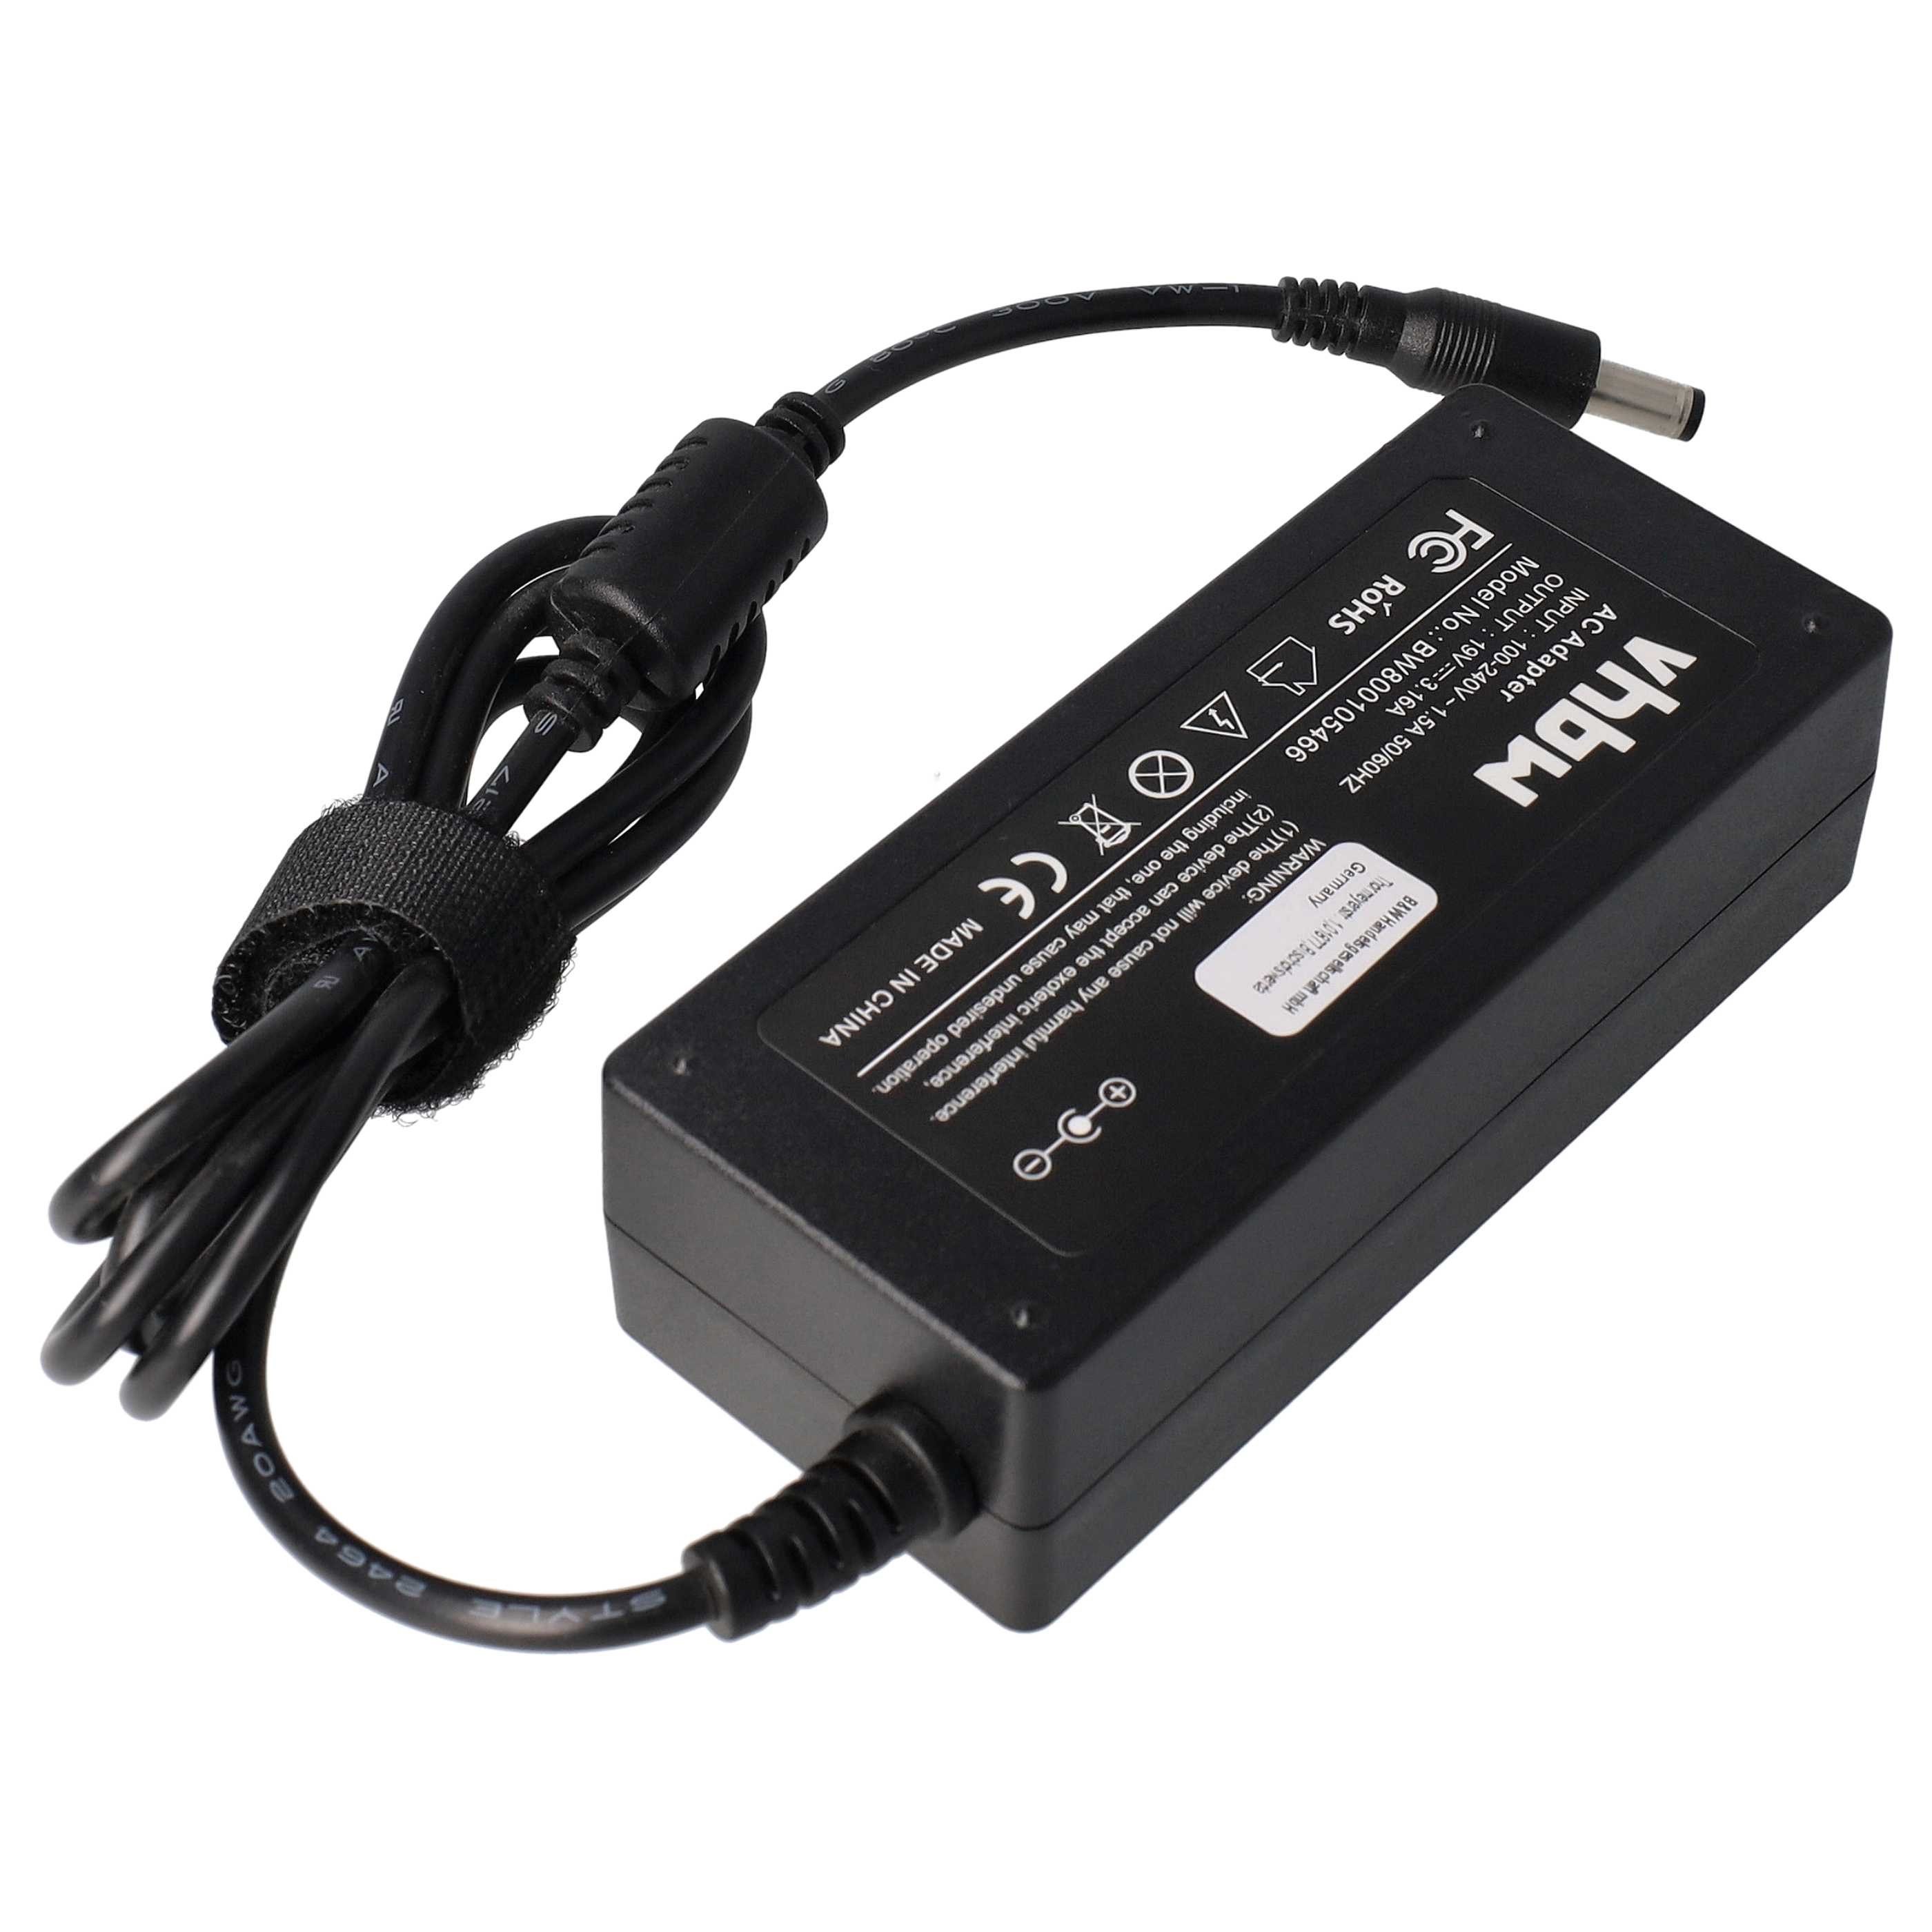 Mains Power Adapter replaces Acer PA-1600-02, 25.10135.011, 25.10064.041, 25.10068.121 for AcerNotebook, 60 W